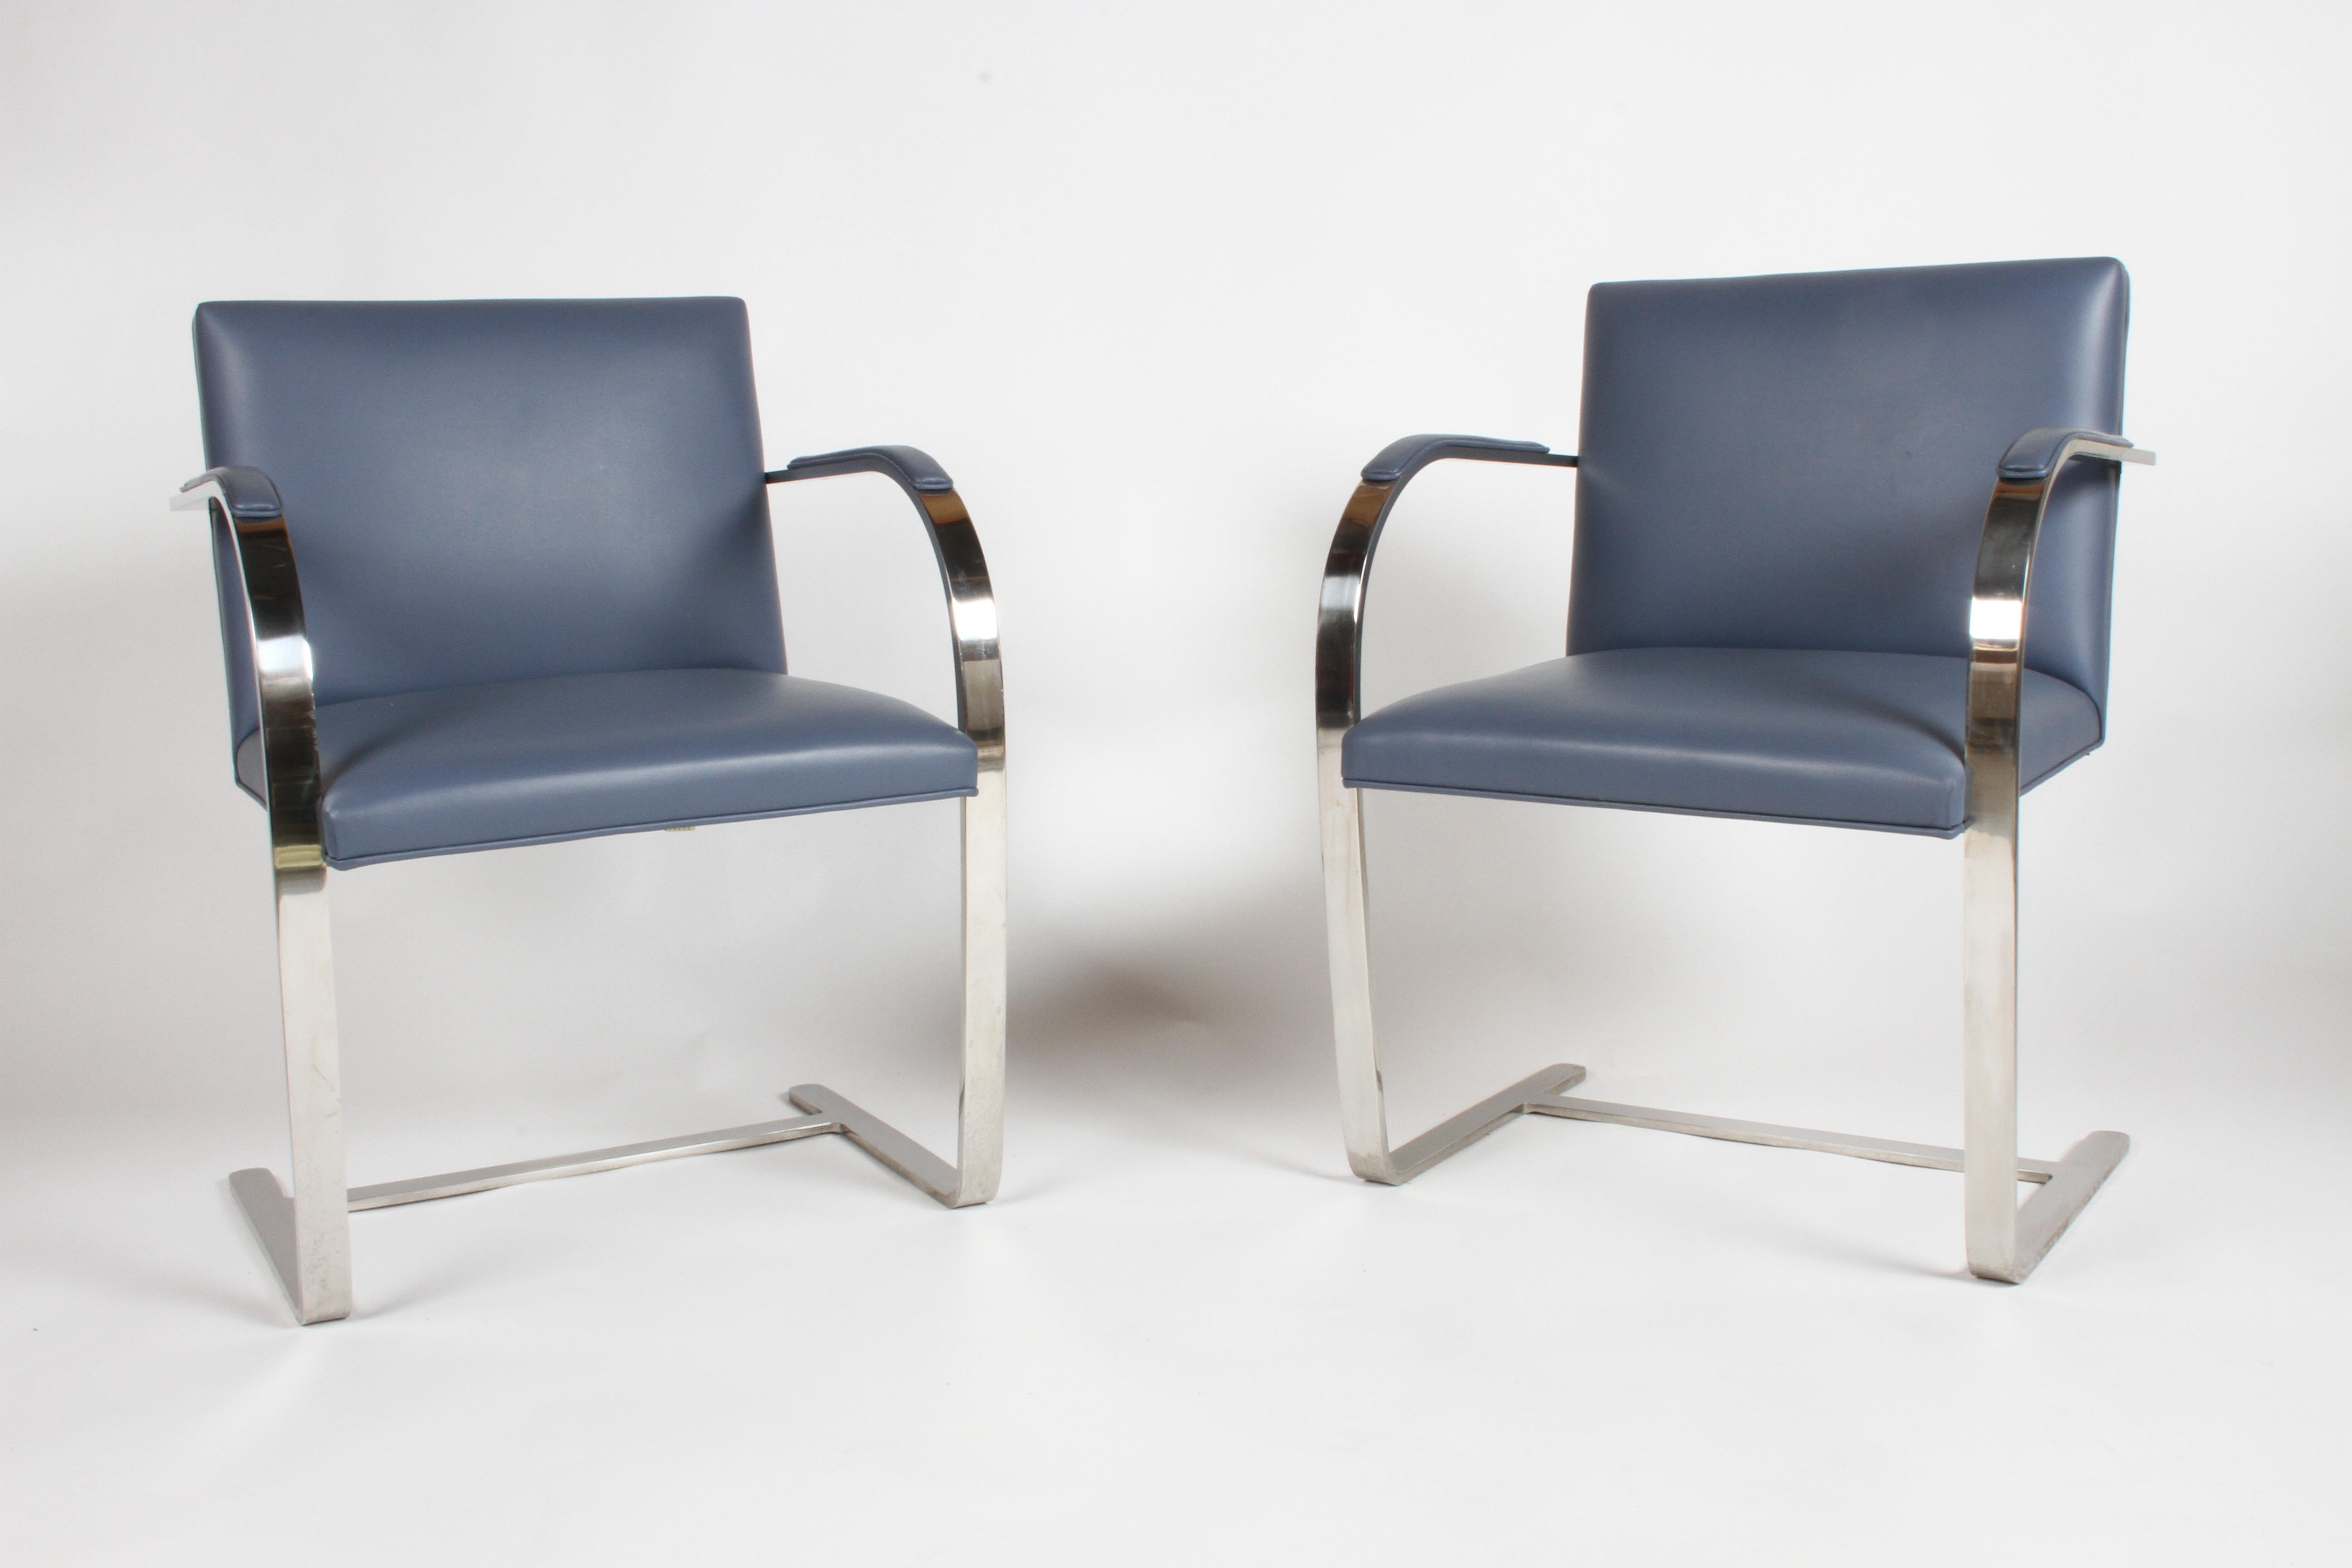 American Pair of Mies van der Rohe Flatbar Brno Chairs by Knoll, Stainless